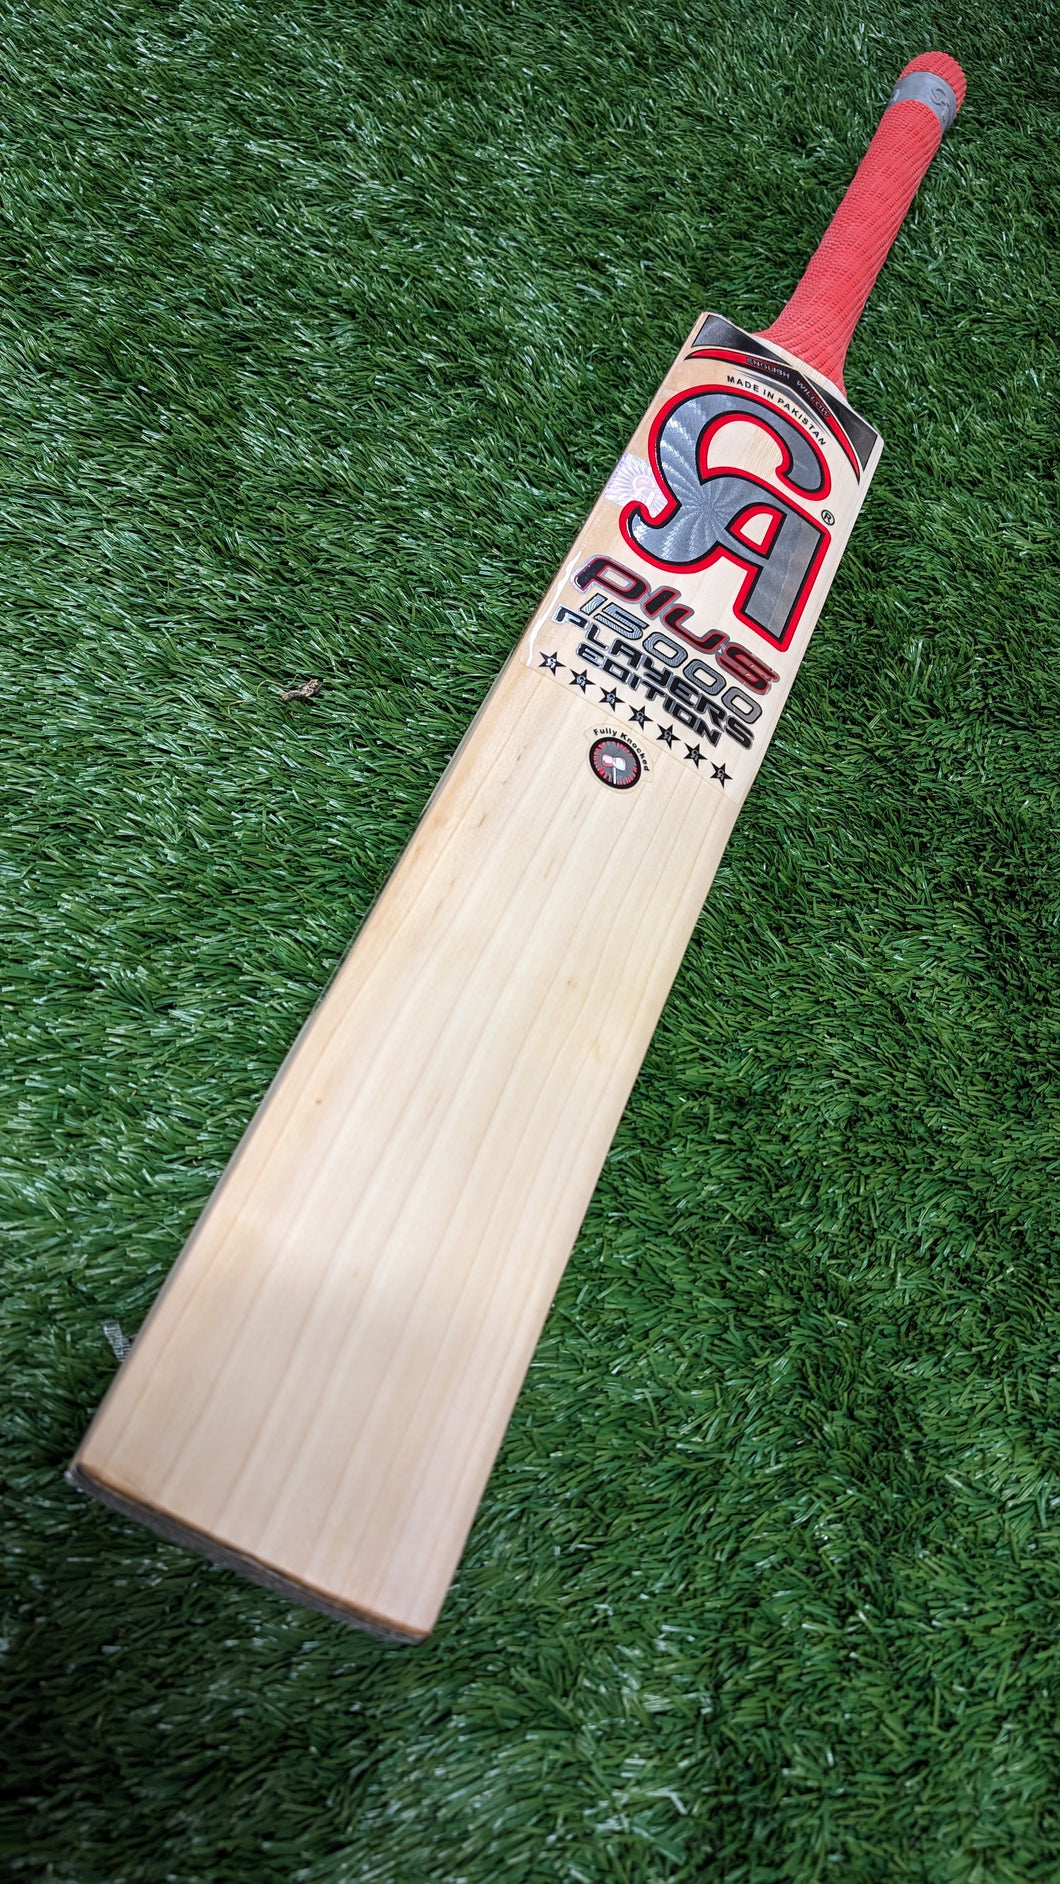 CA Plus 15000 Players 7 star Edition Cricket Bat (RED)